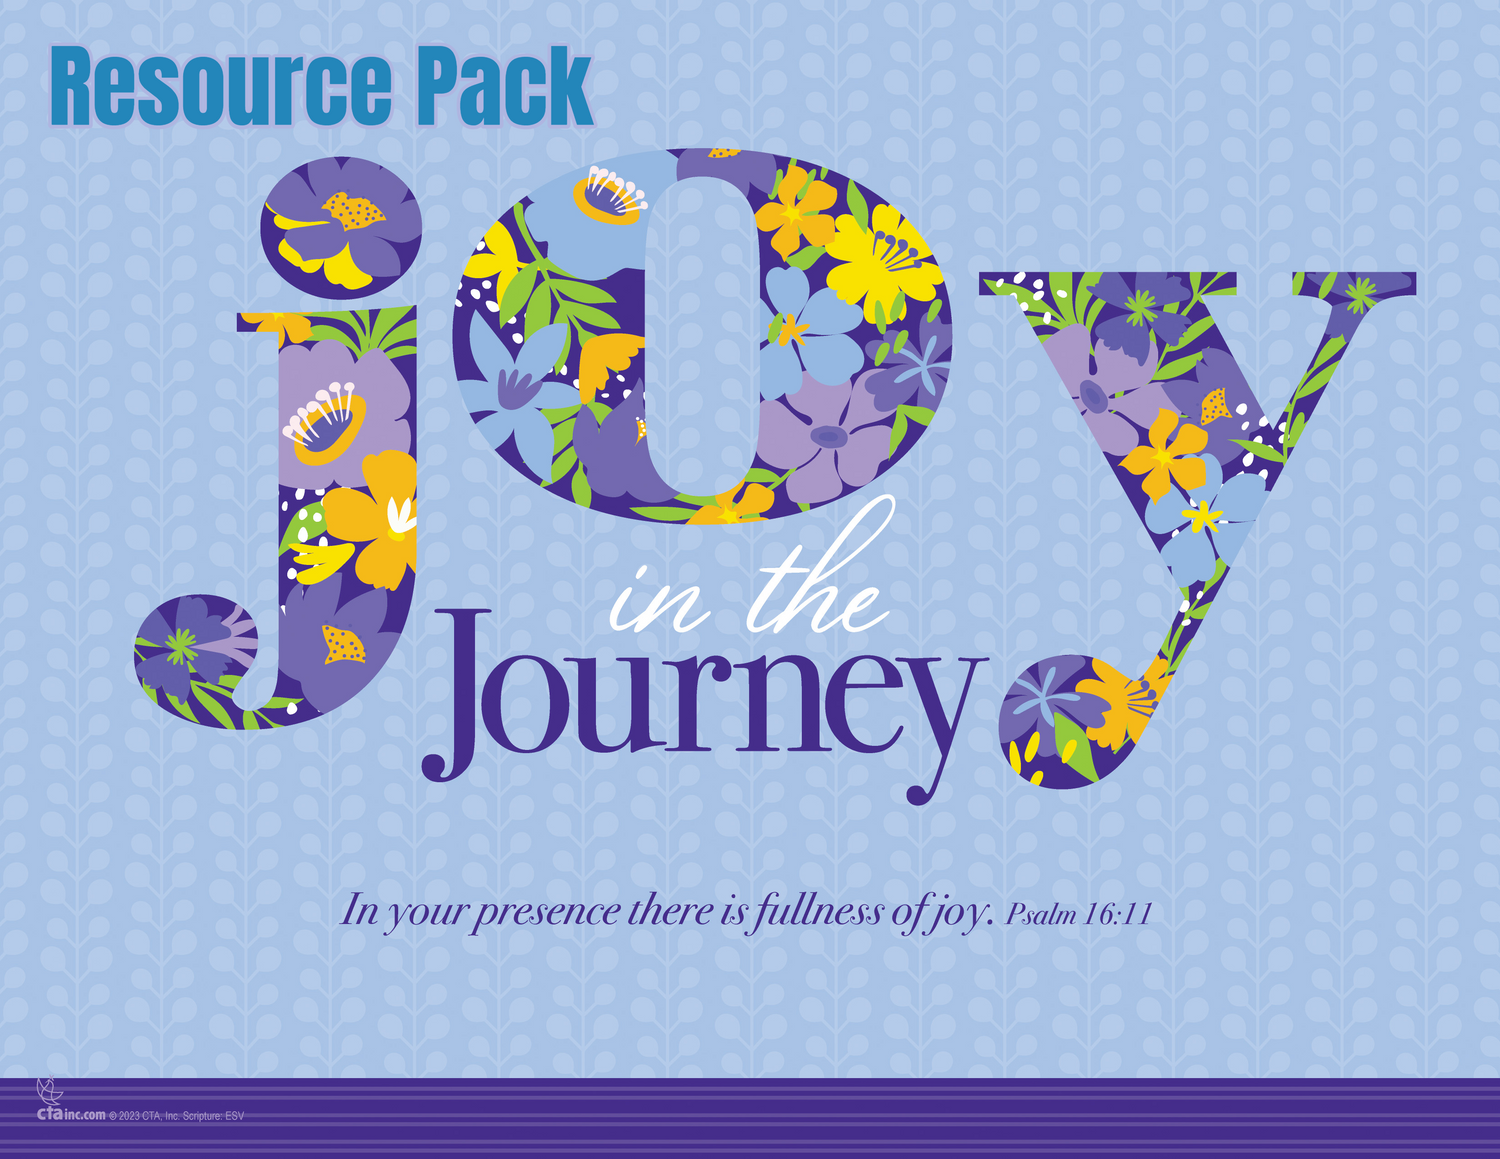 Free downloadable resources for CTA, Inc's Joy in the Journey product line for Christian women